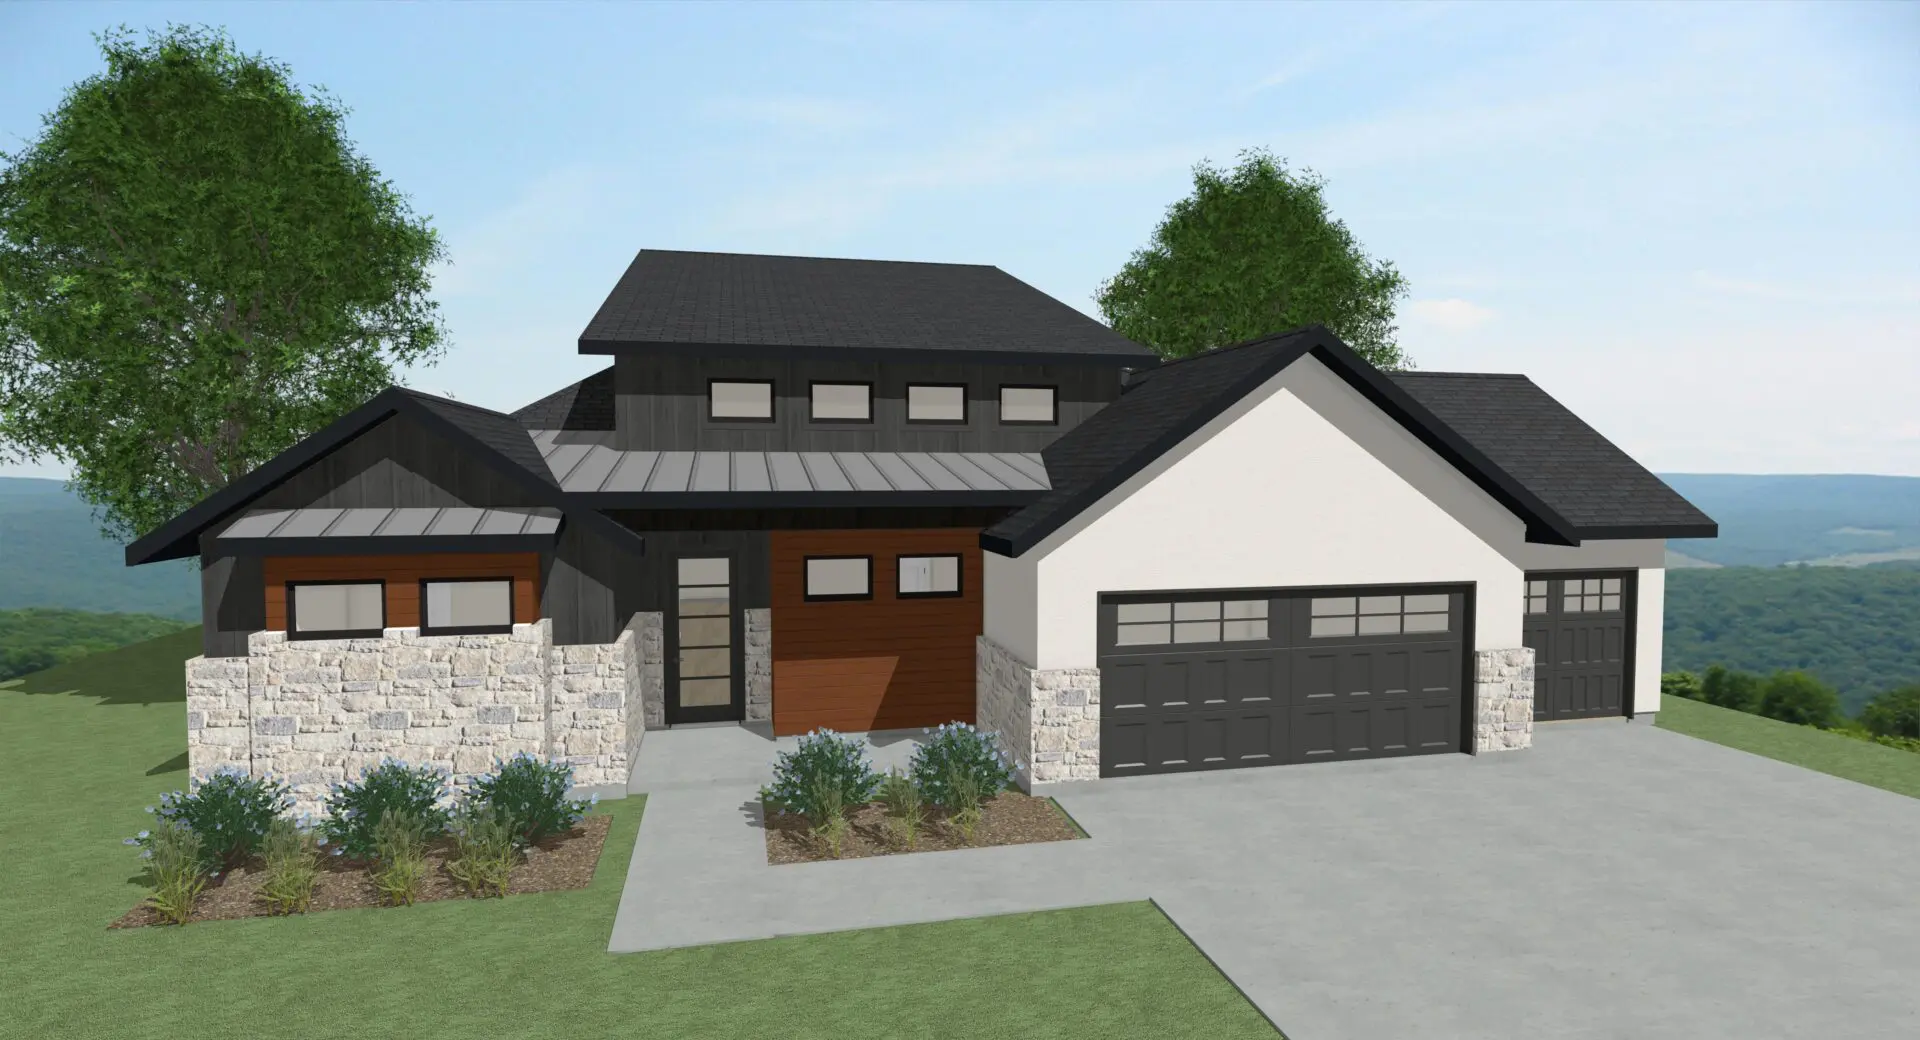 A rendering of a home with a garage and two car garage.